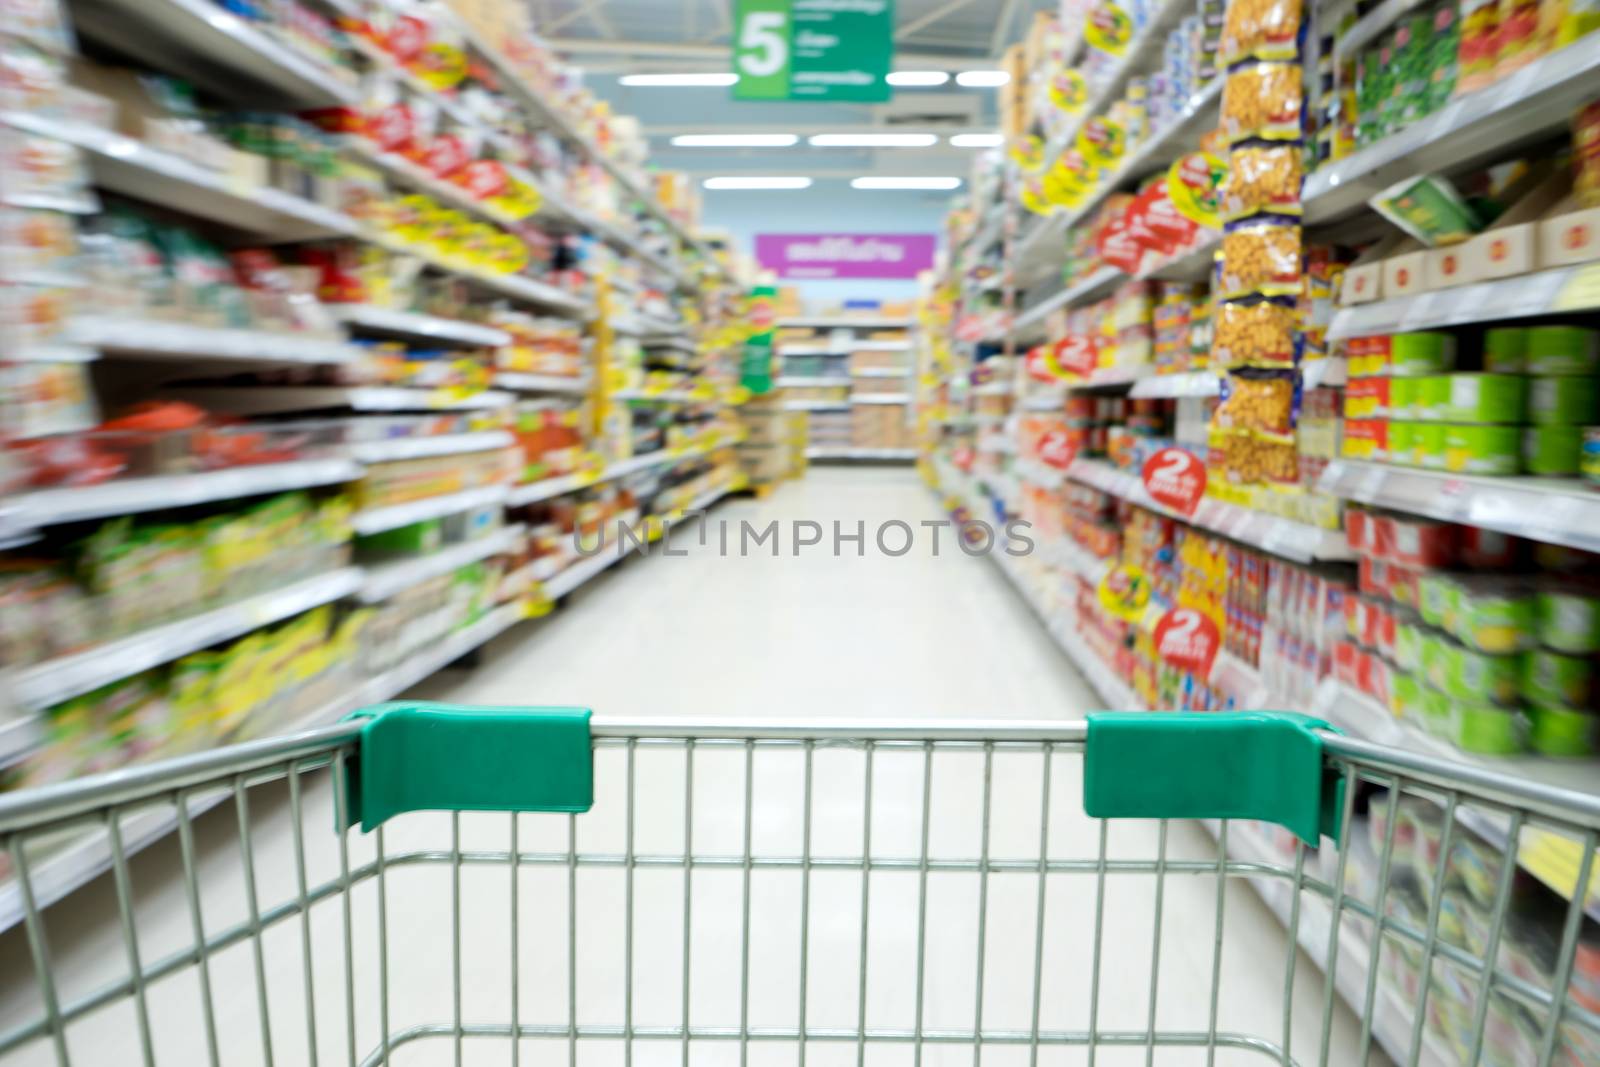 Shopping in supermarket shopping cart view with motion blur